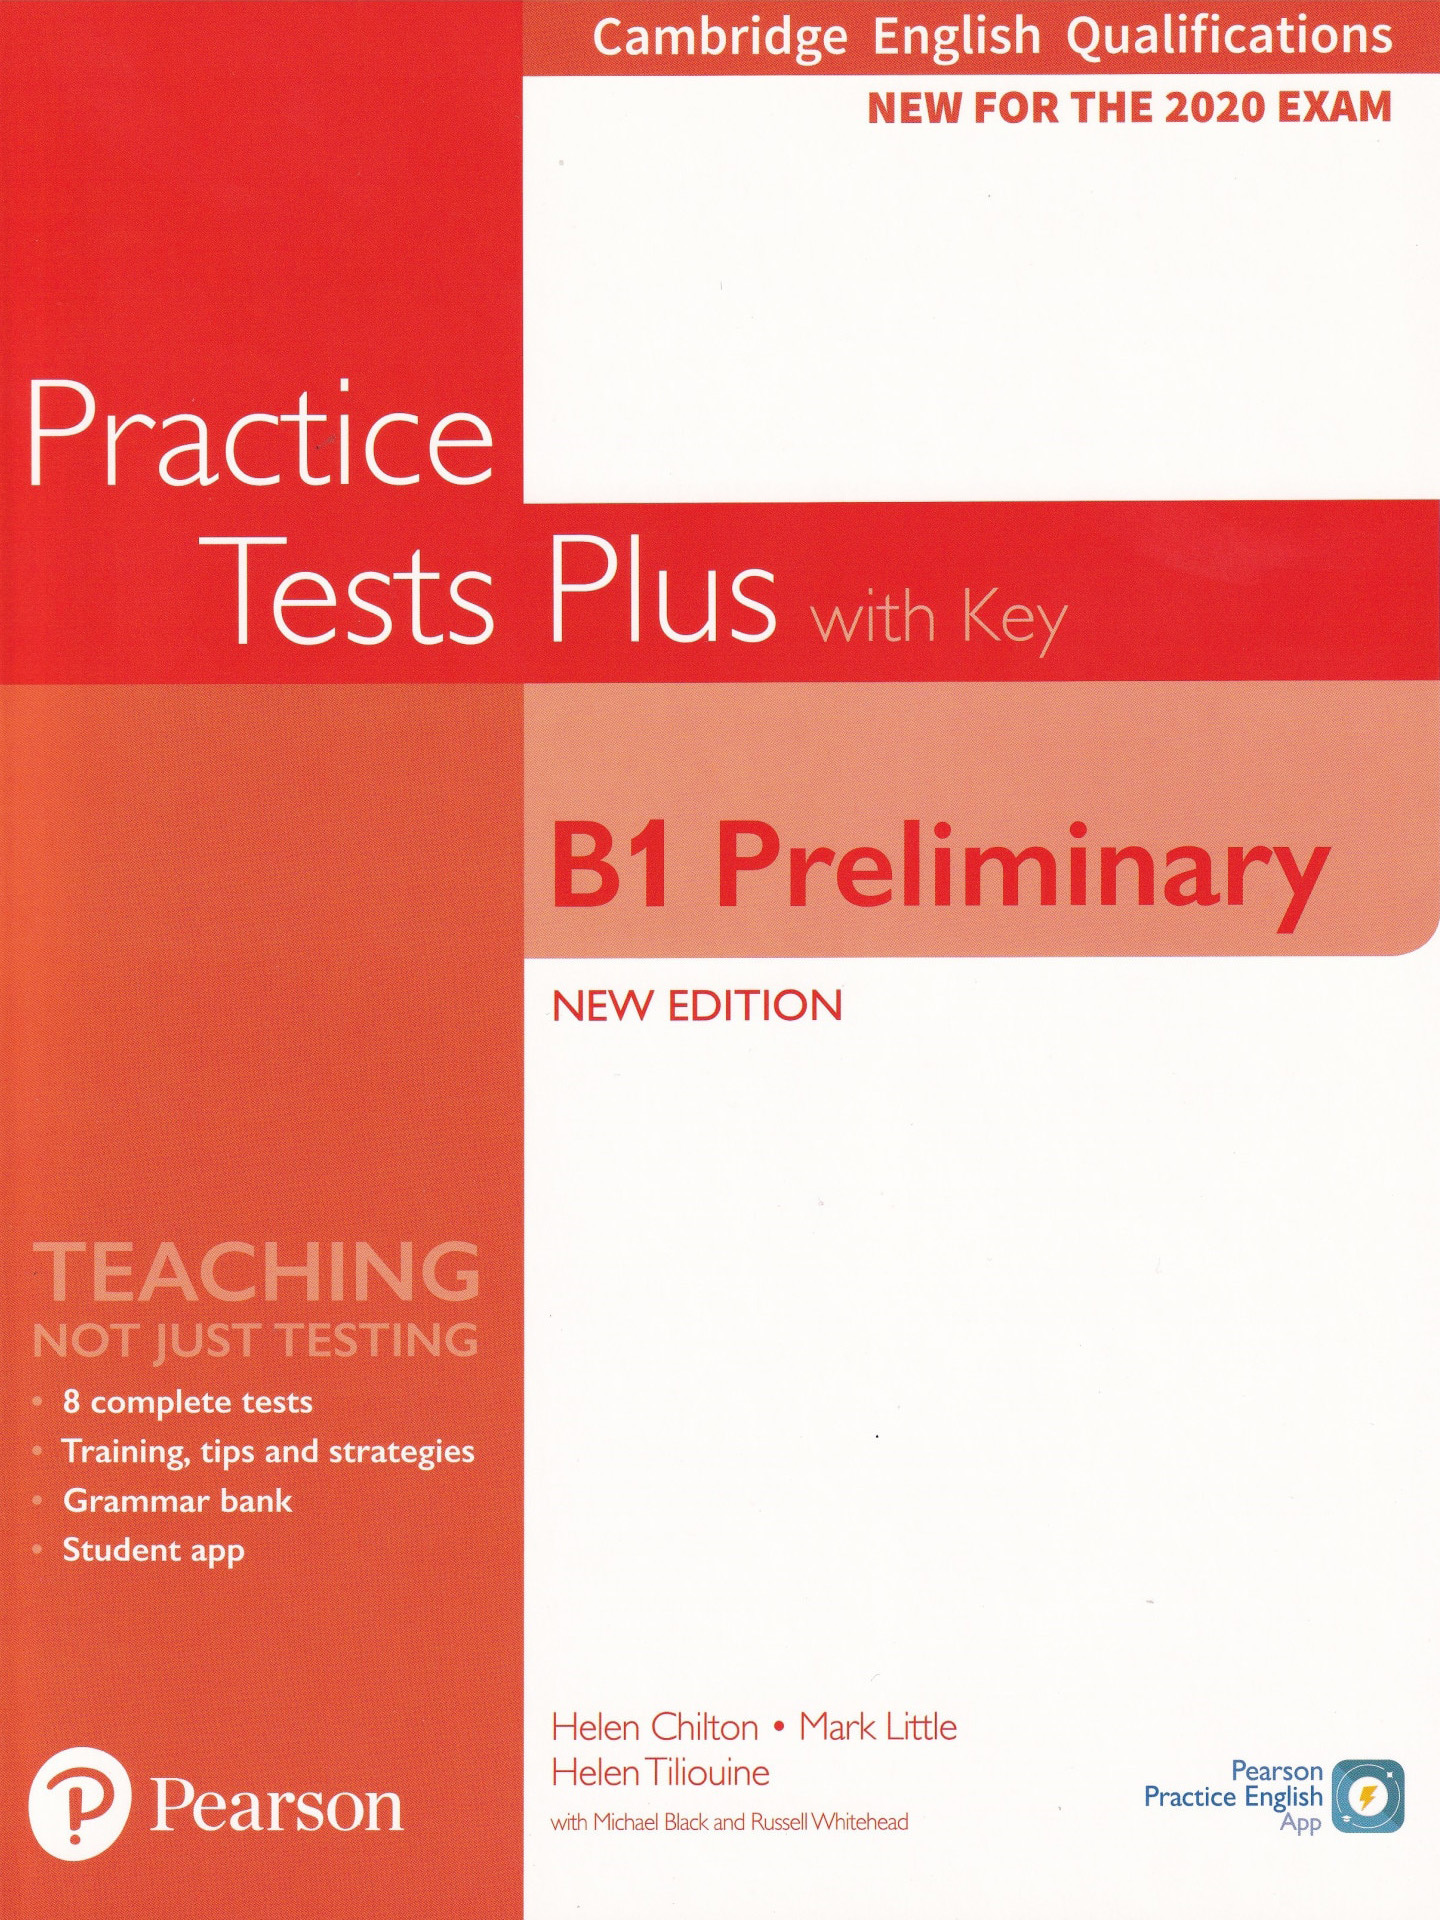 Cambridge English Qualifications: B1 Preliminary New Edition - Practice Tests Plus Student&#039;s Book with key